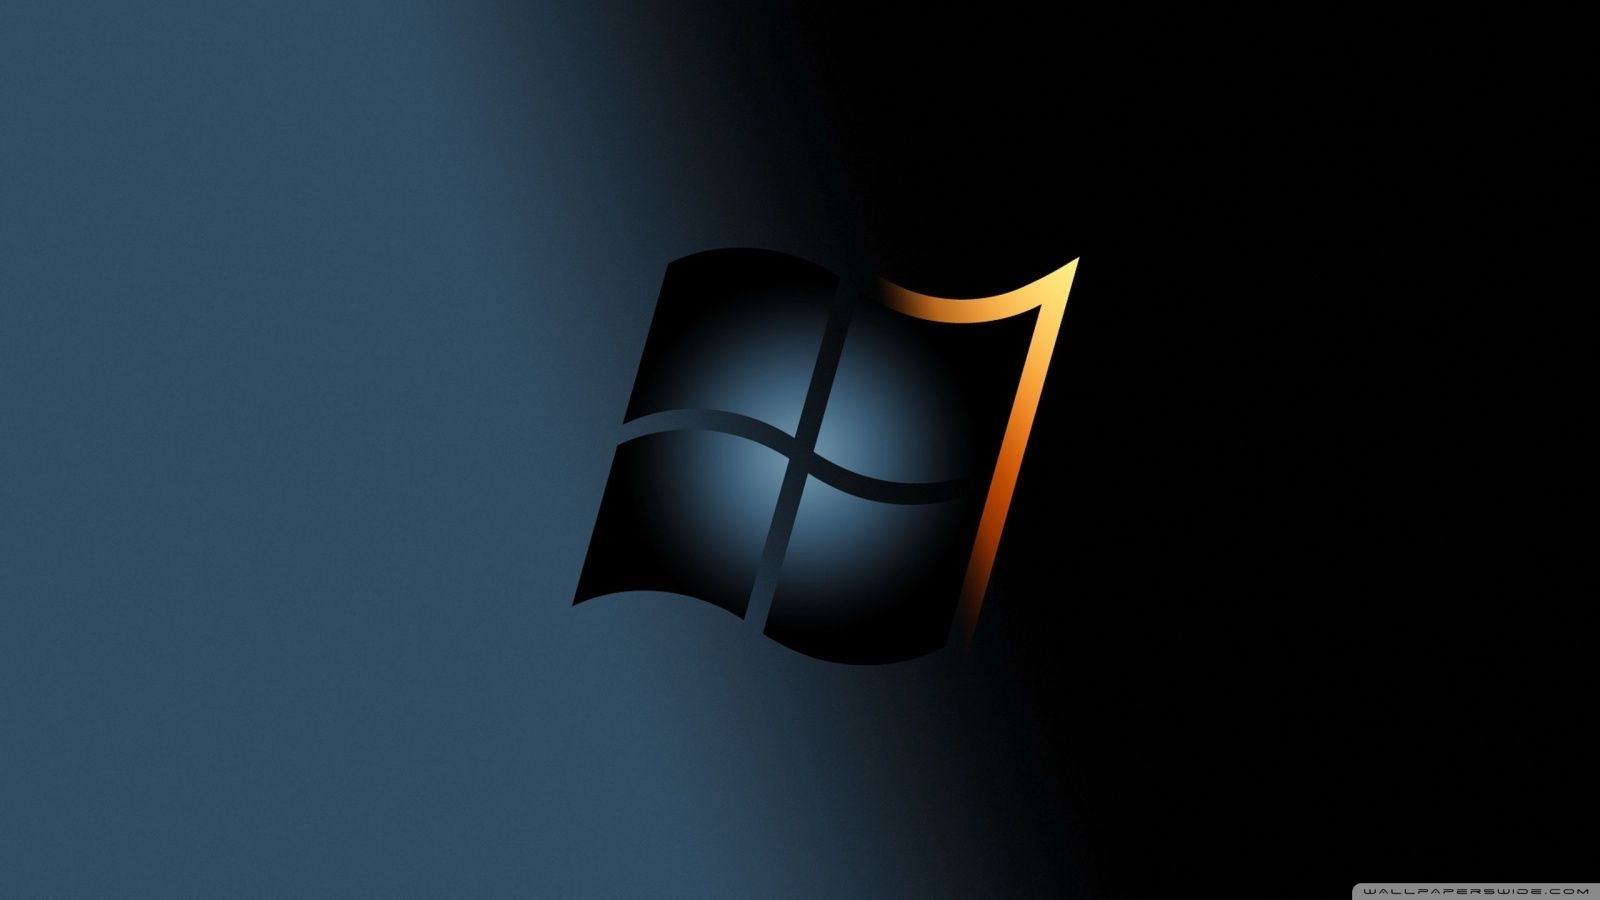 🔥 Download Desktops by @rrice61 | Cool Windows 7 Wallpapers, Cool ...